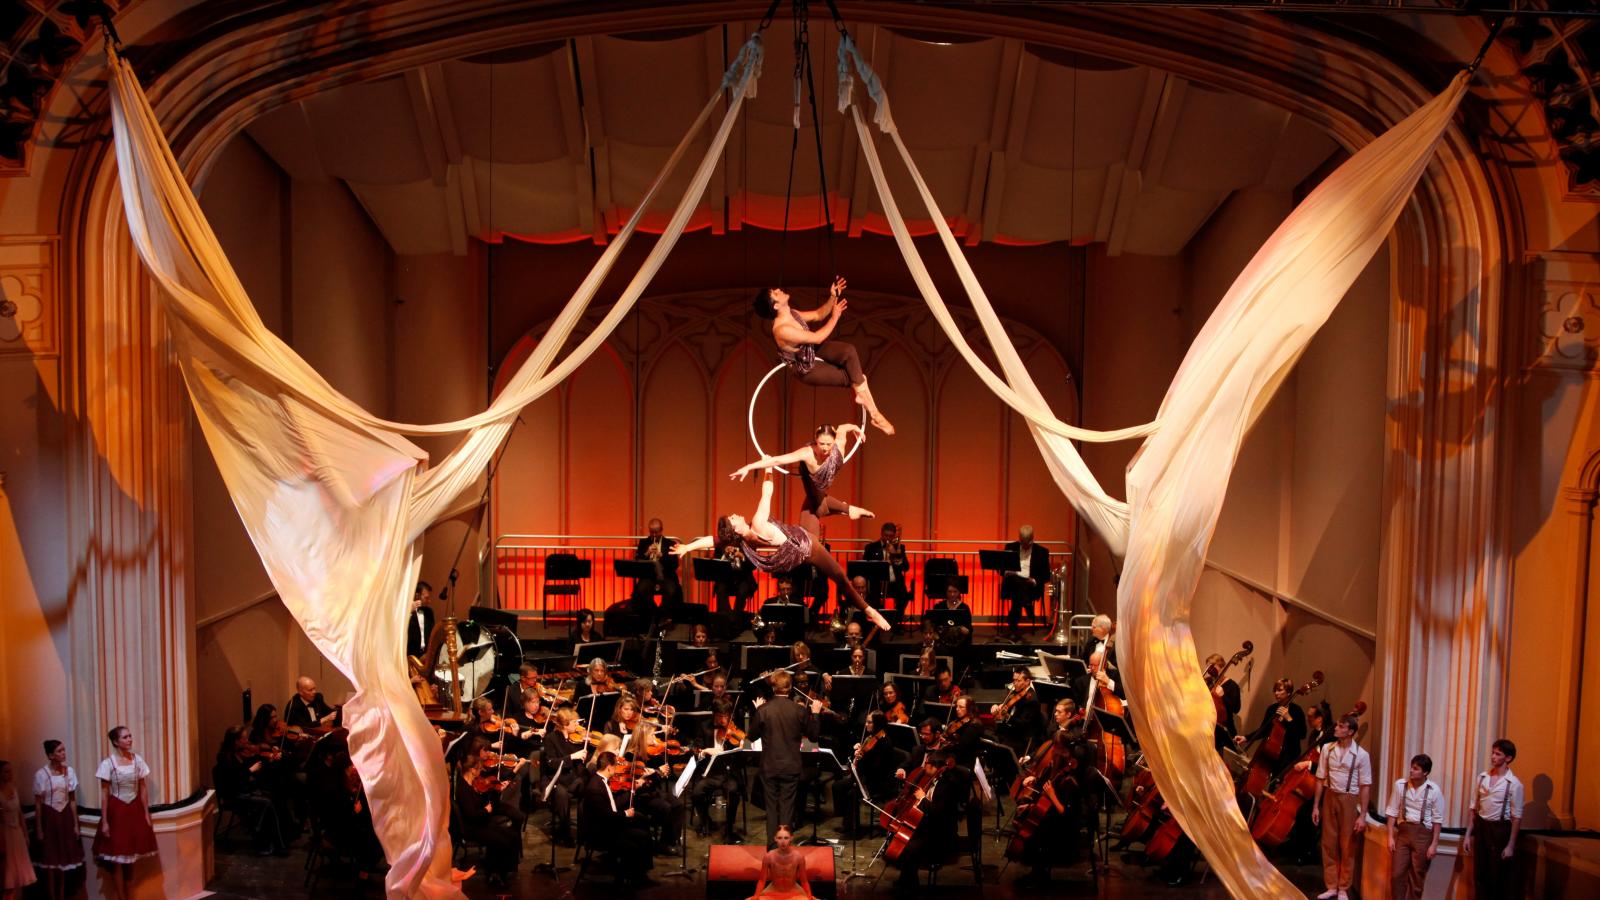 Orchestra on stage performing, while acrobats are also performing on the same stage. 